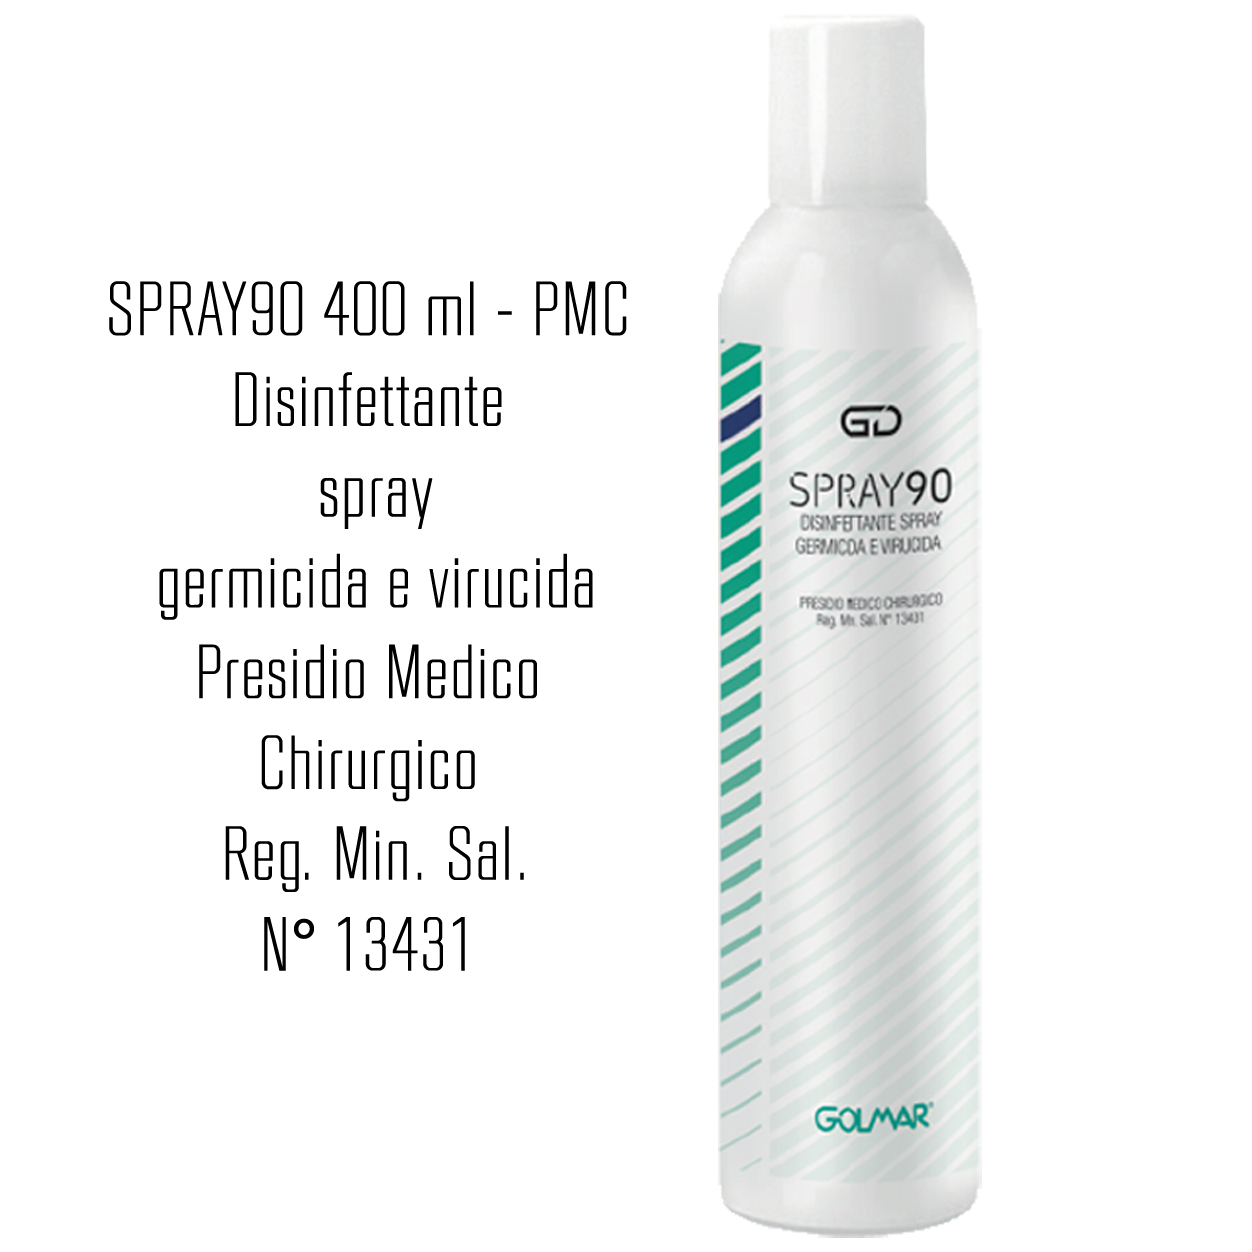 GOLMAR GD90 Spray 400 ml. - Biocide - broad-spectrum professional disinfectant (effective against viruses including CoronaVirus, bacteria, yeasts and moulds)